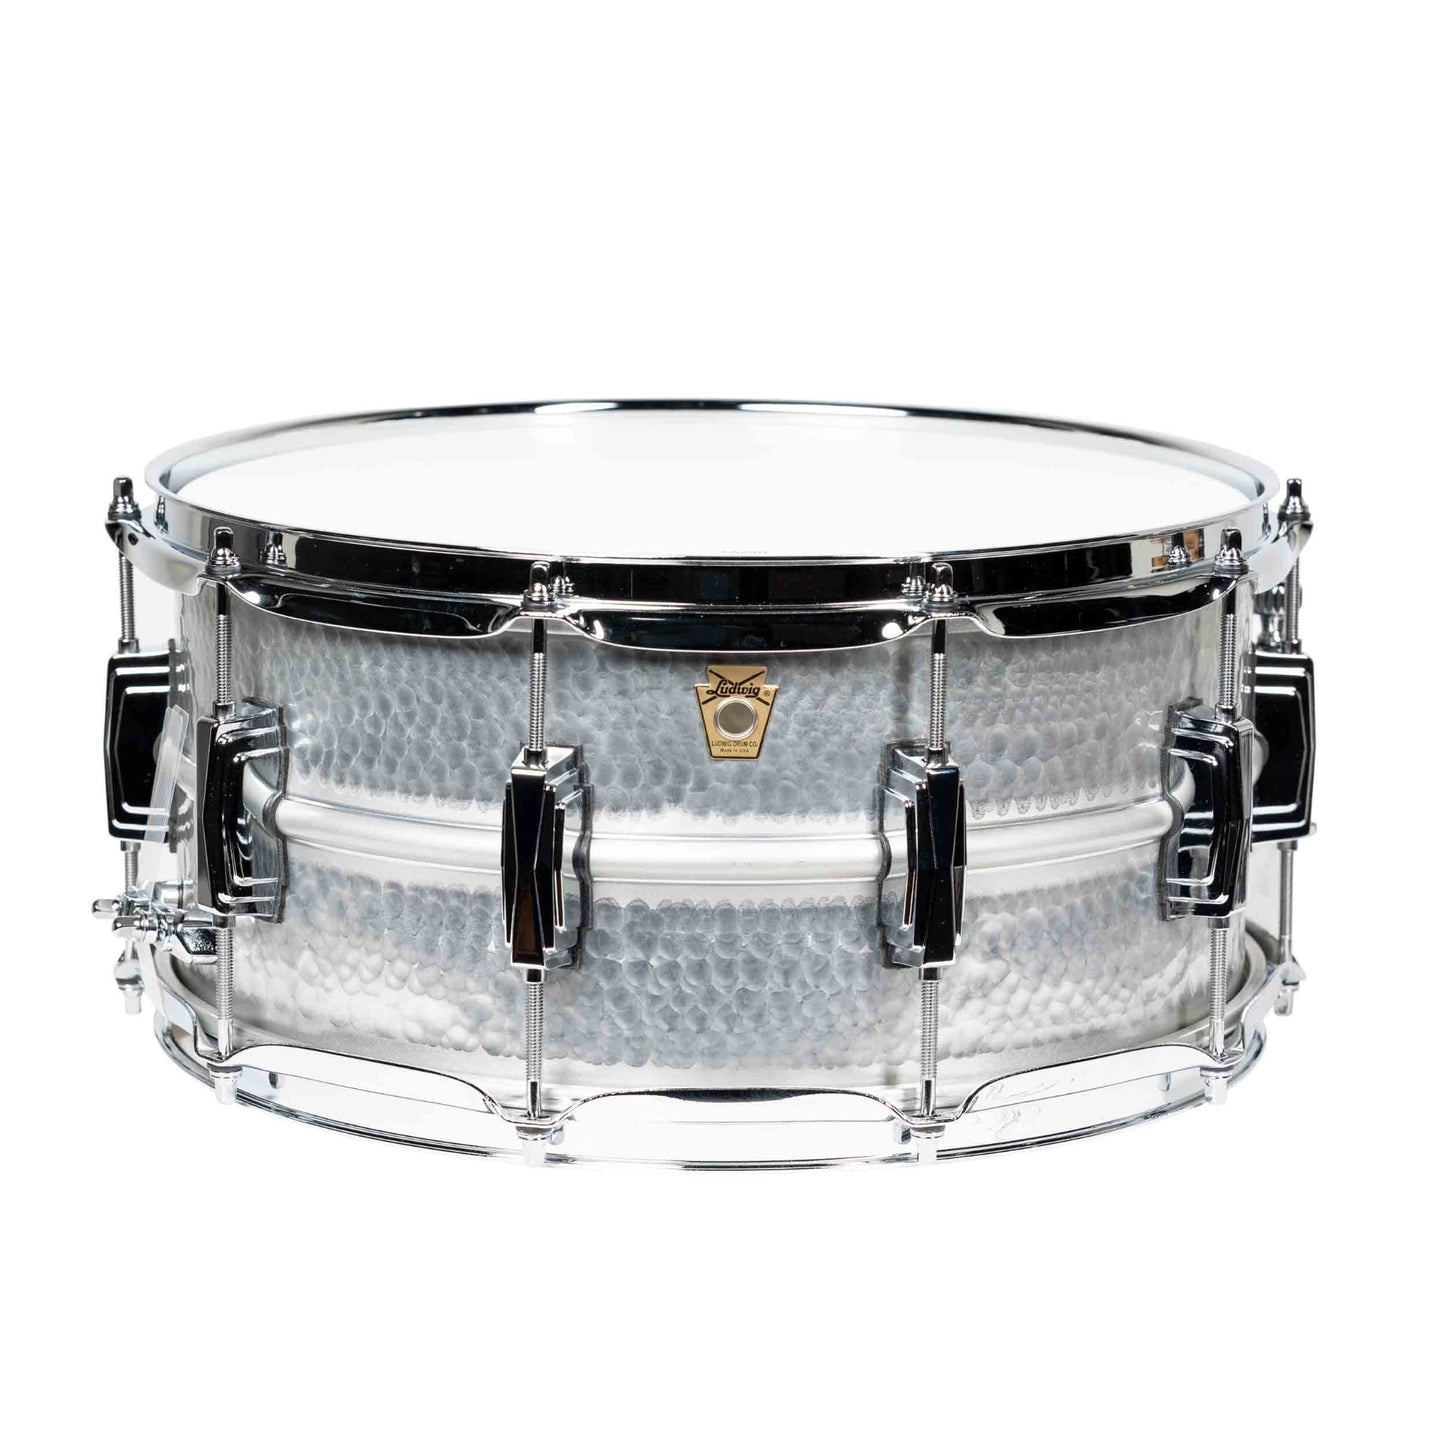 Ludwig Acrophonic 5x14 Hammered Snare Drum